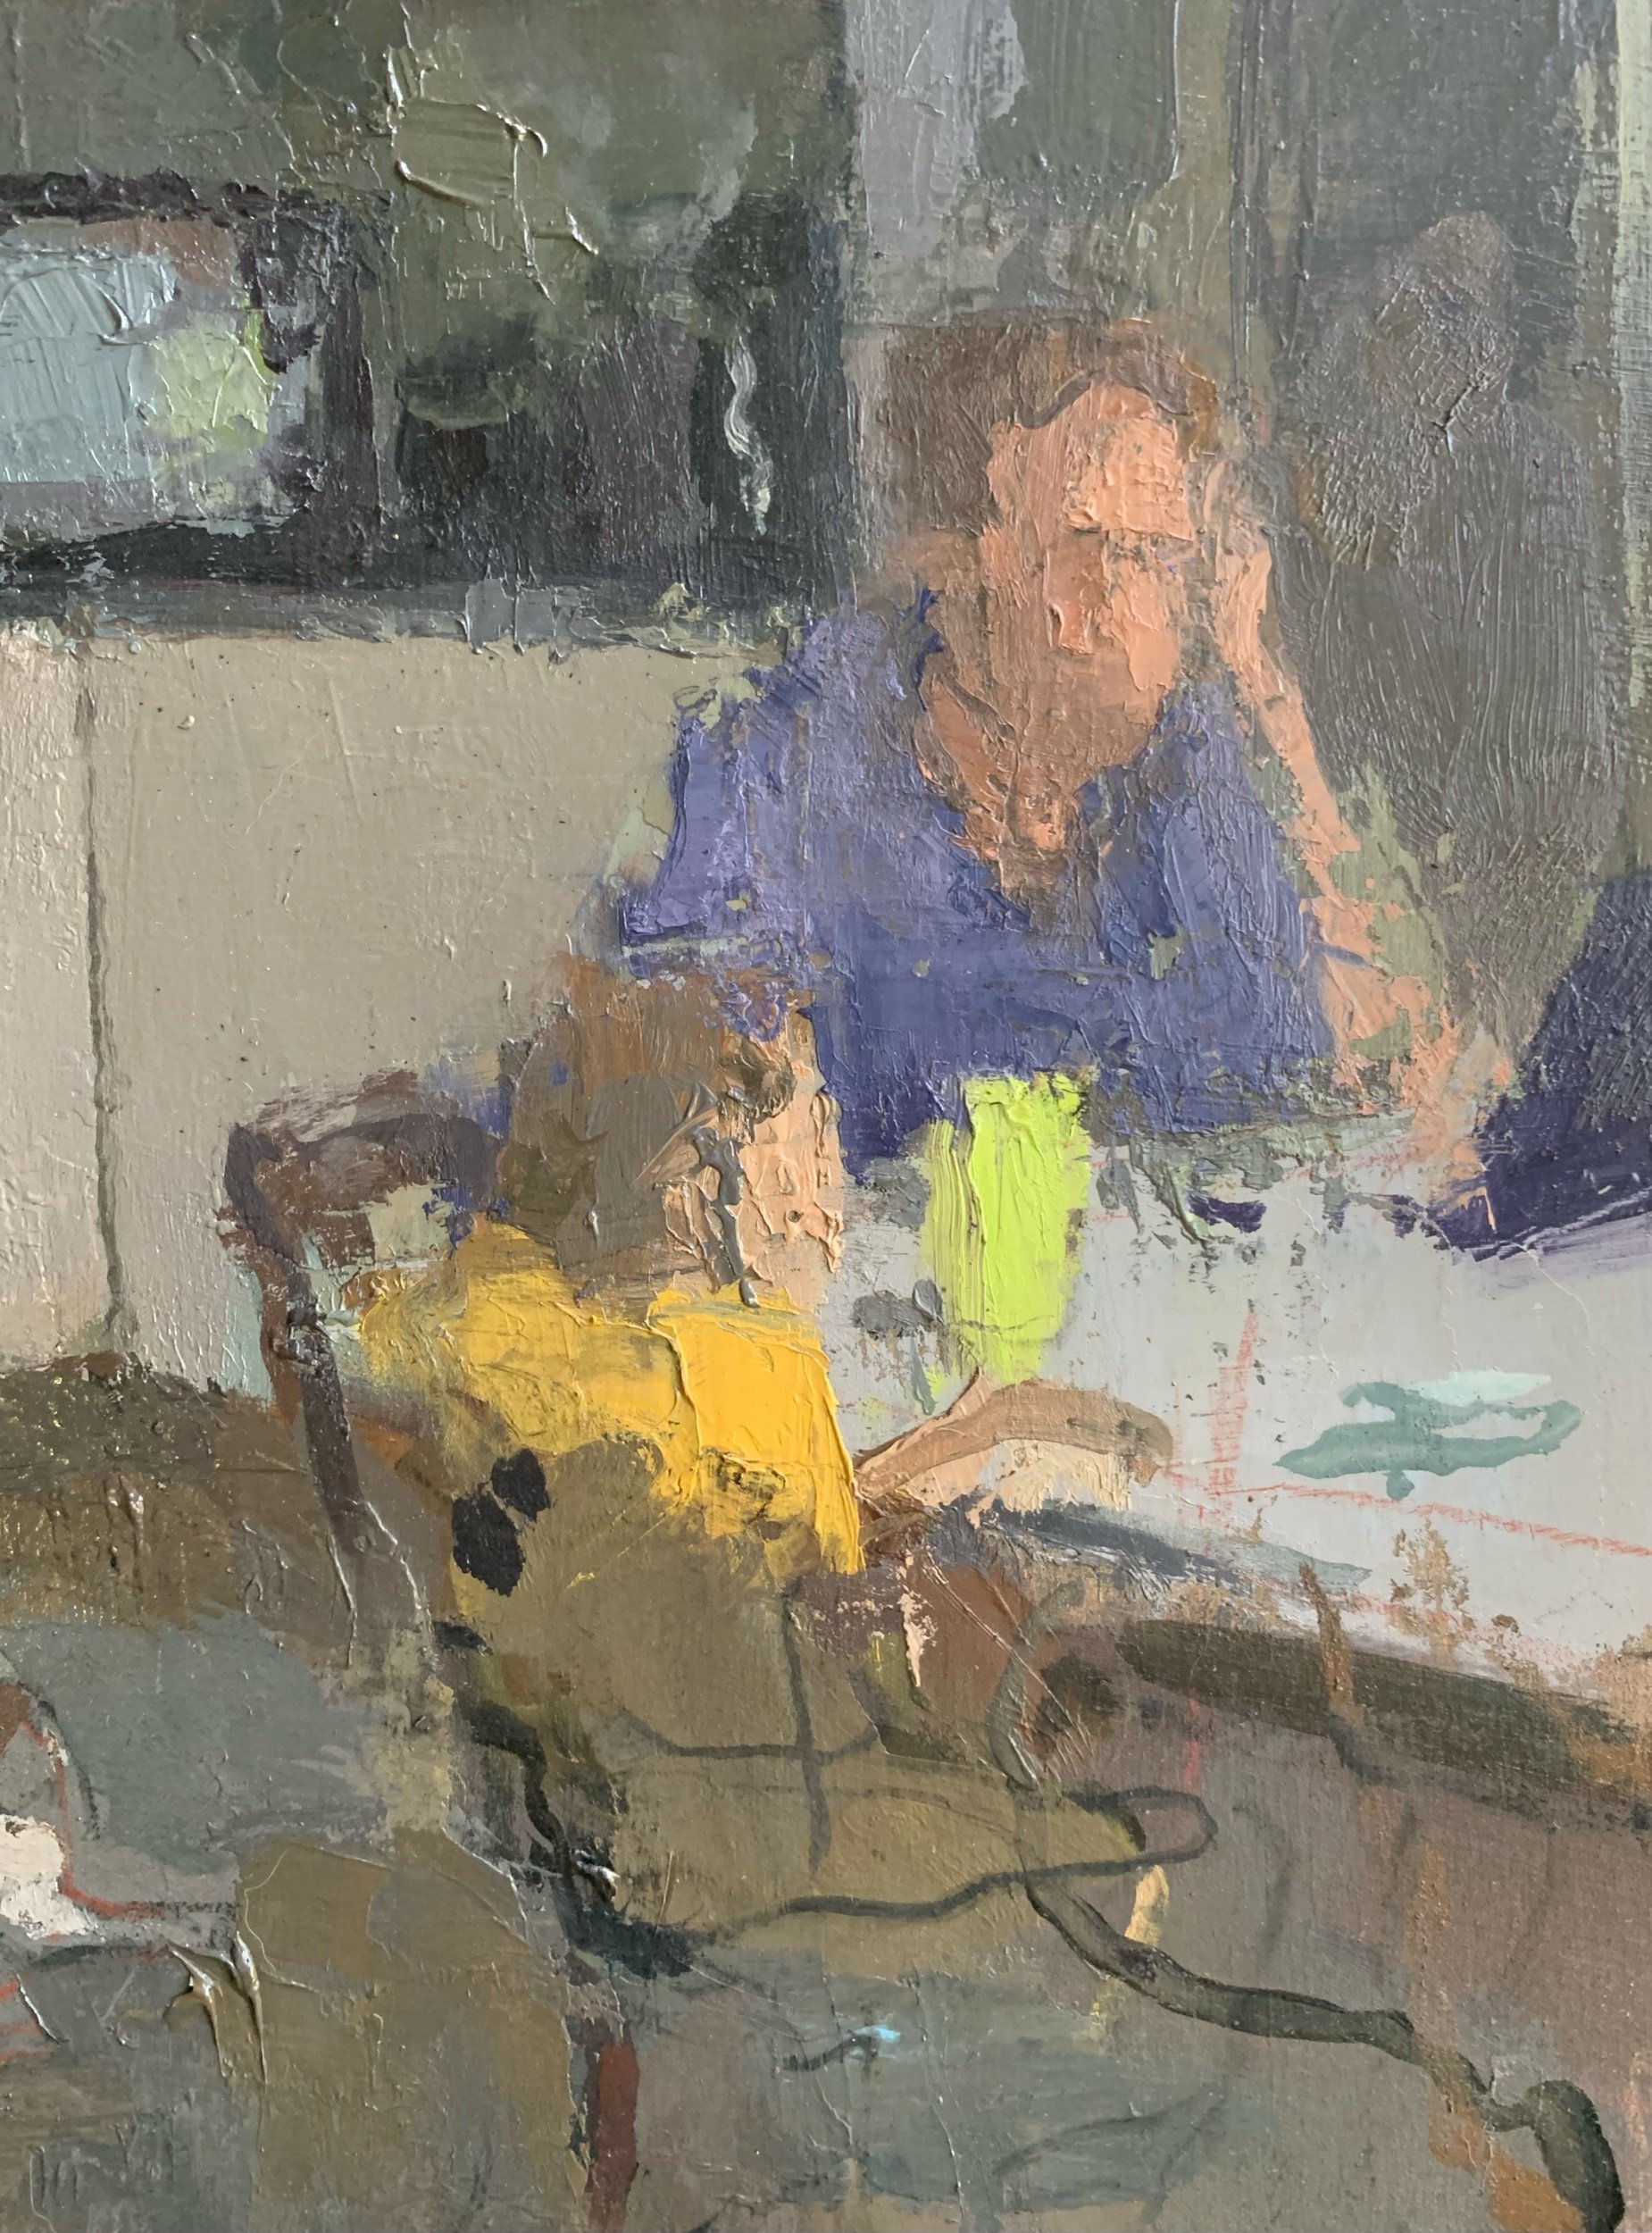   Sam and Peter at the table,  detail 